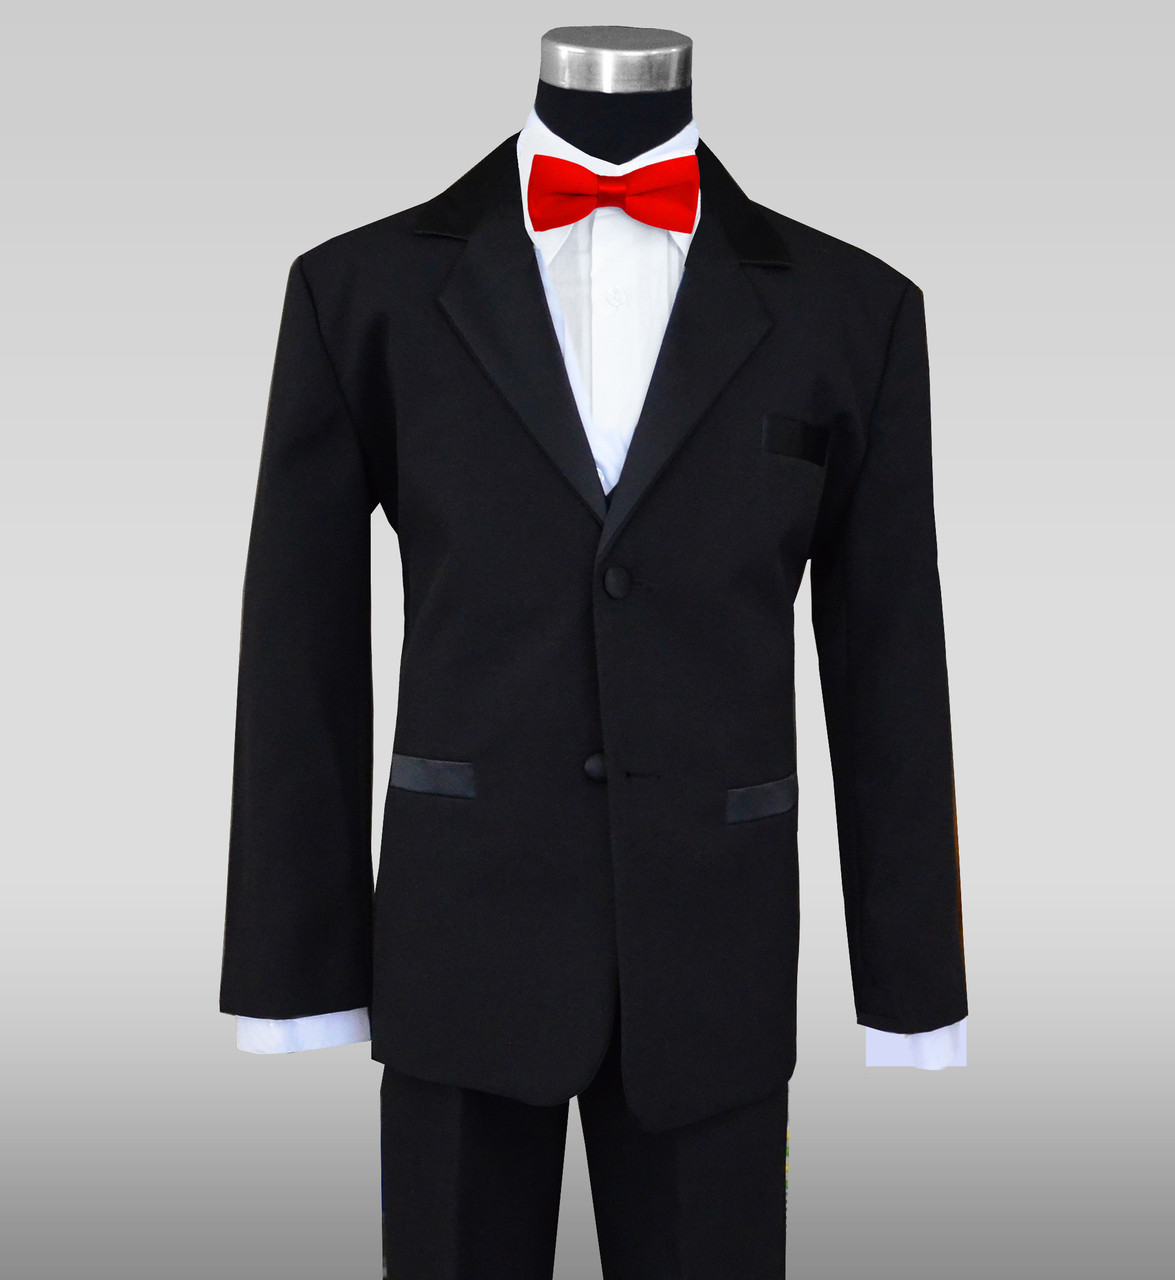 Boys Tuxedos In Black With Red Slim Bow Tie - red tux roblox pants